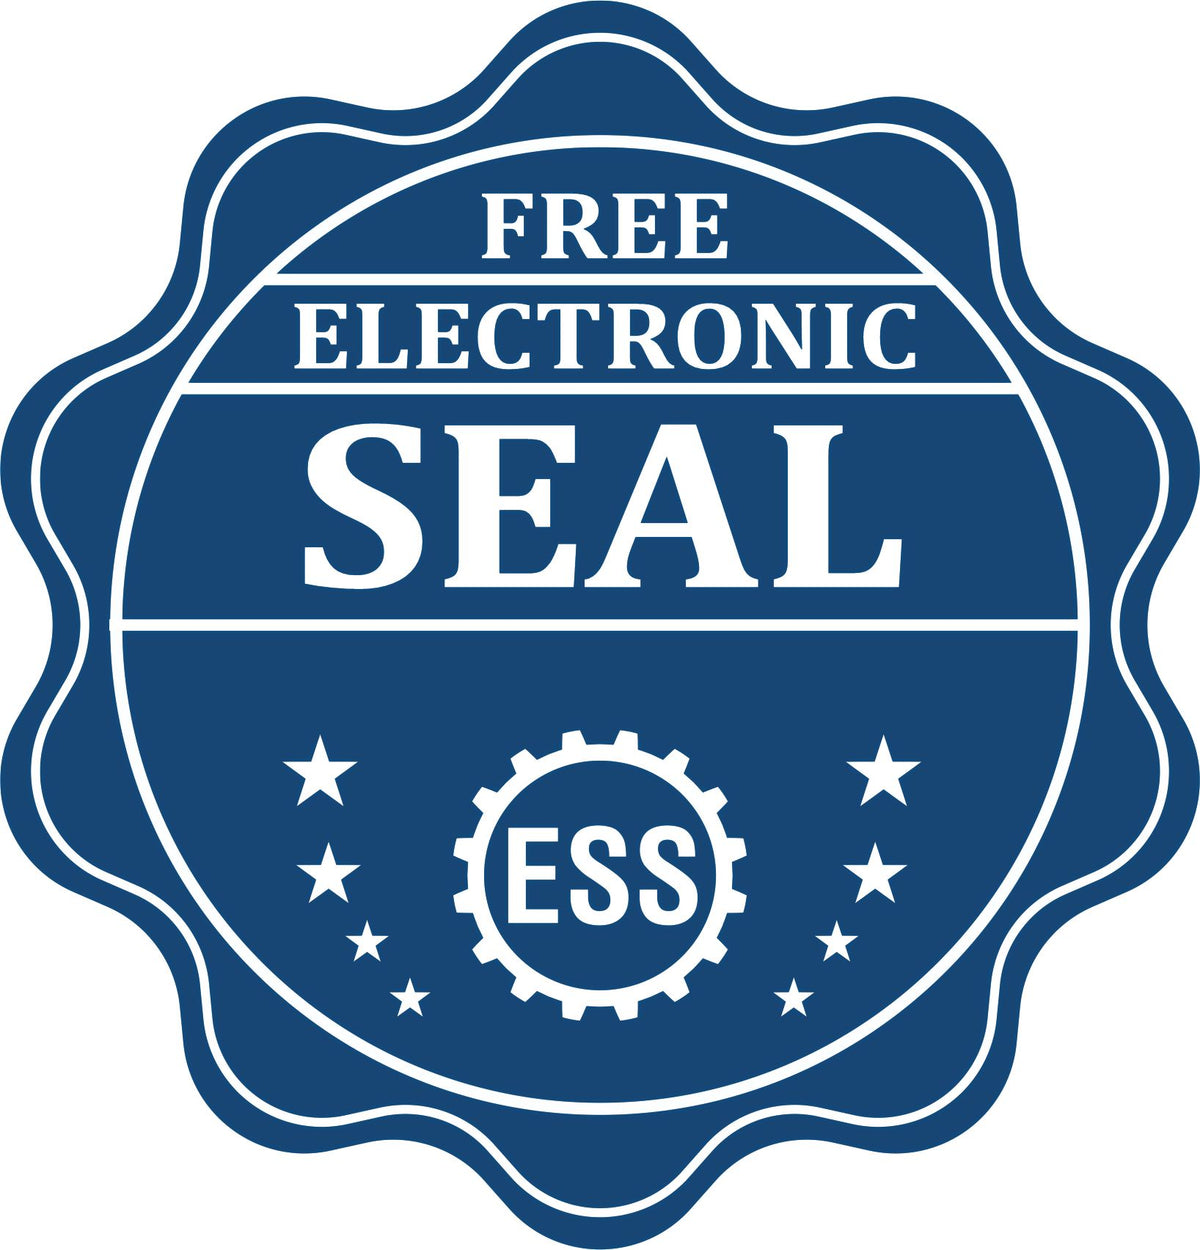 A badge showing a free electronic seal for the Minnesota Desk Architect Embossing Seal with stars and the ESS gear on the emblem.